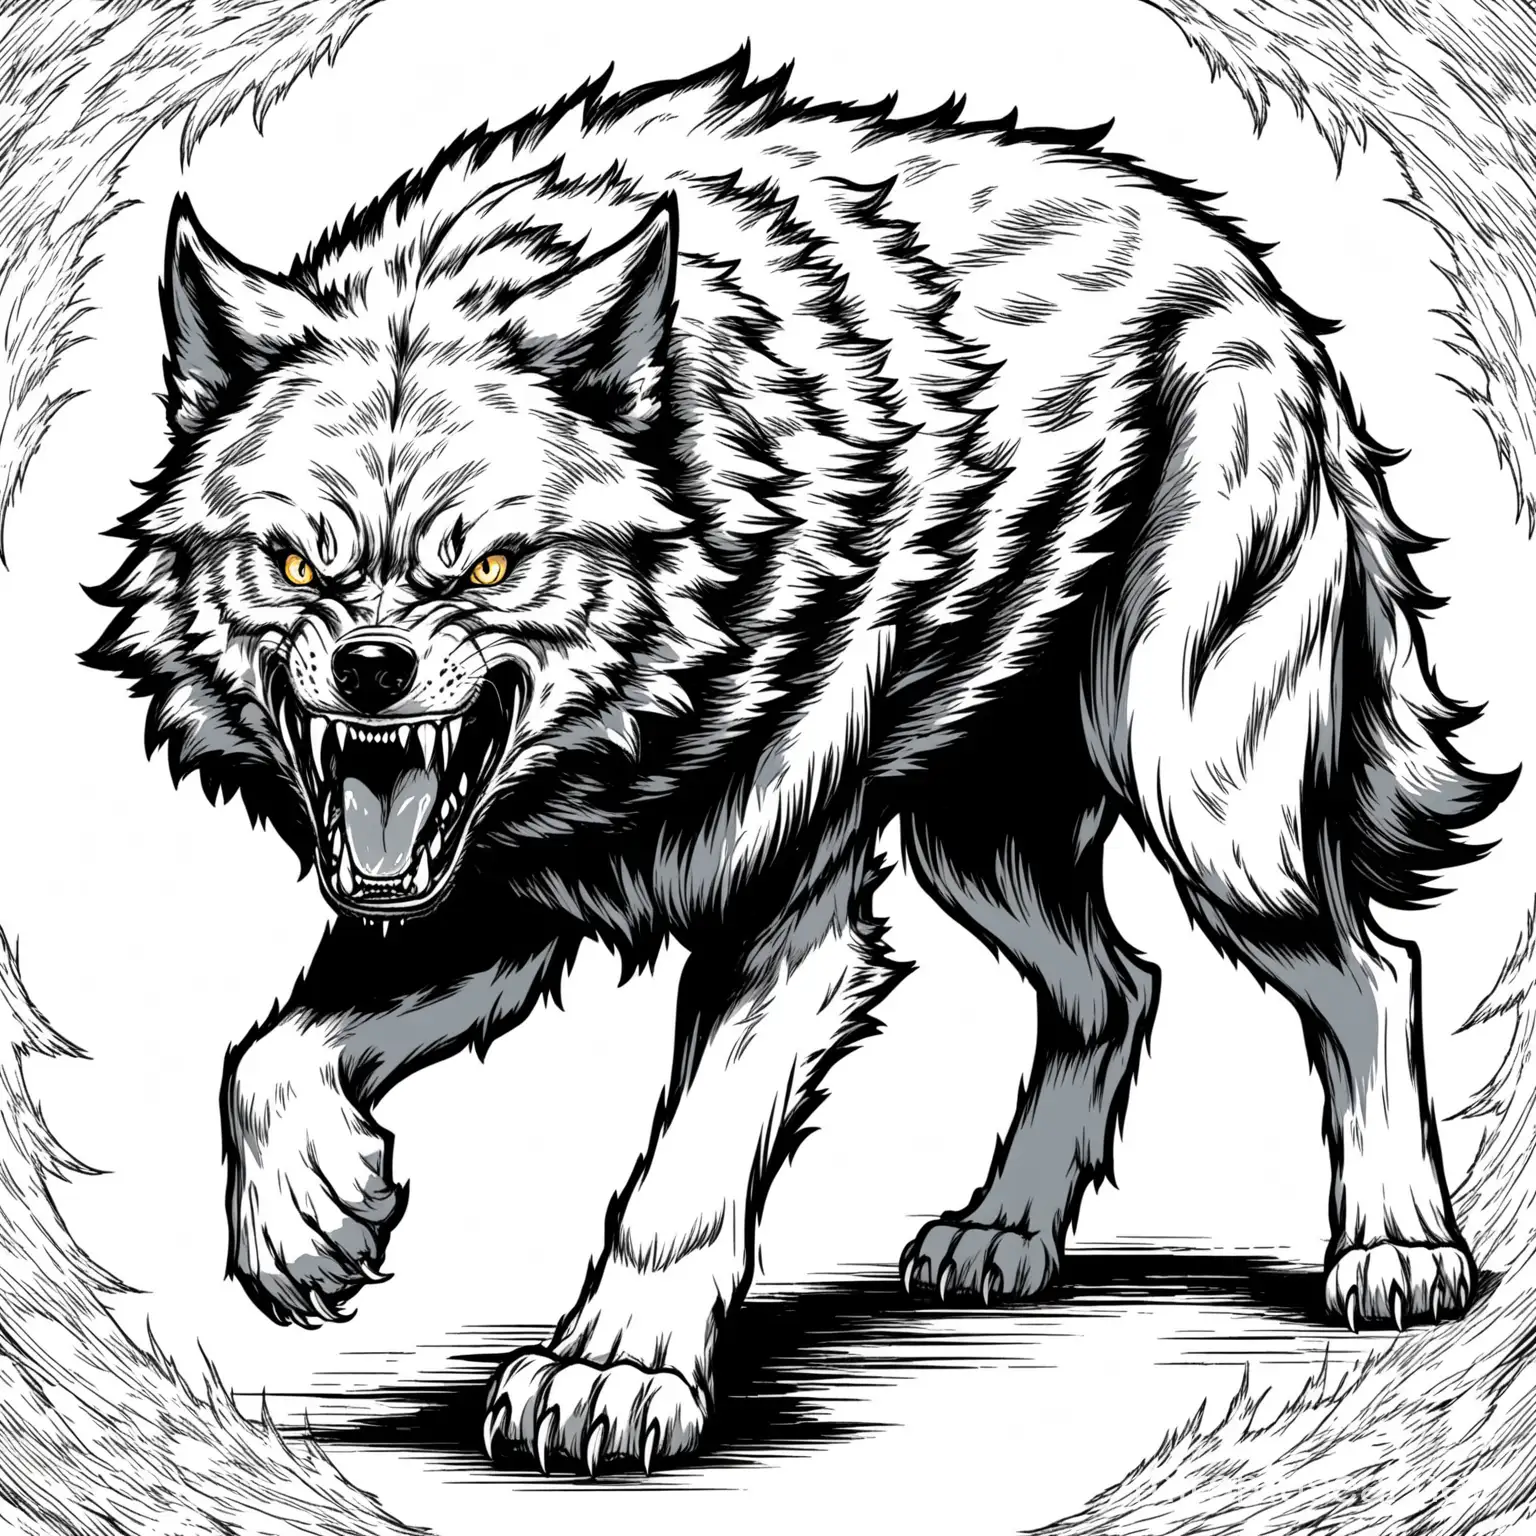 coloring book style, full body snarling wolf, ready to attack, no background